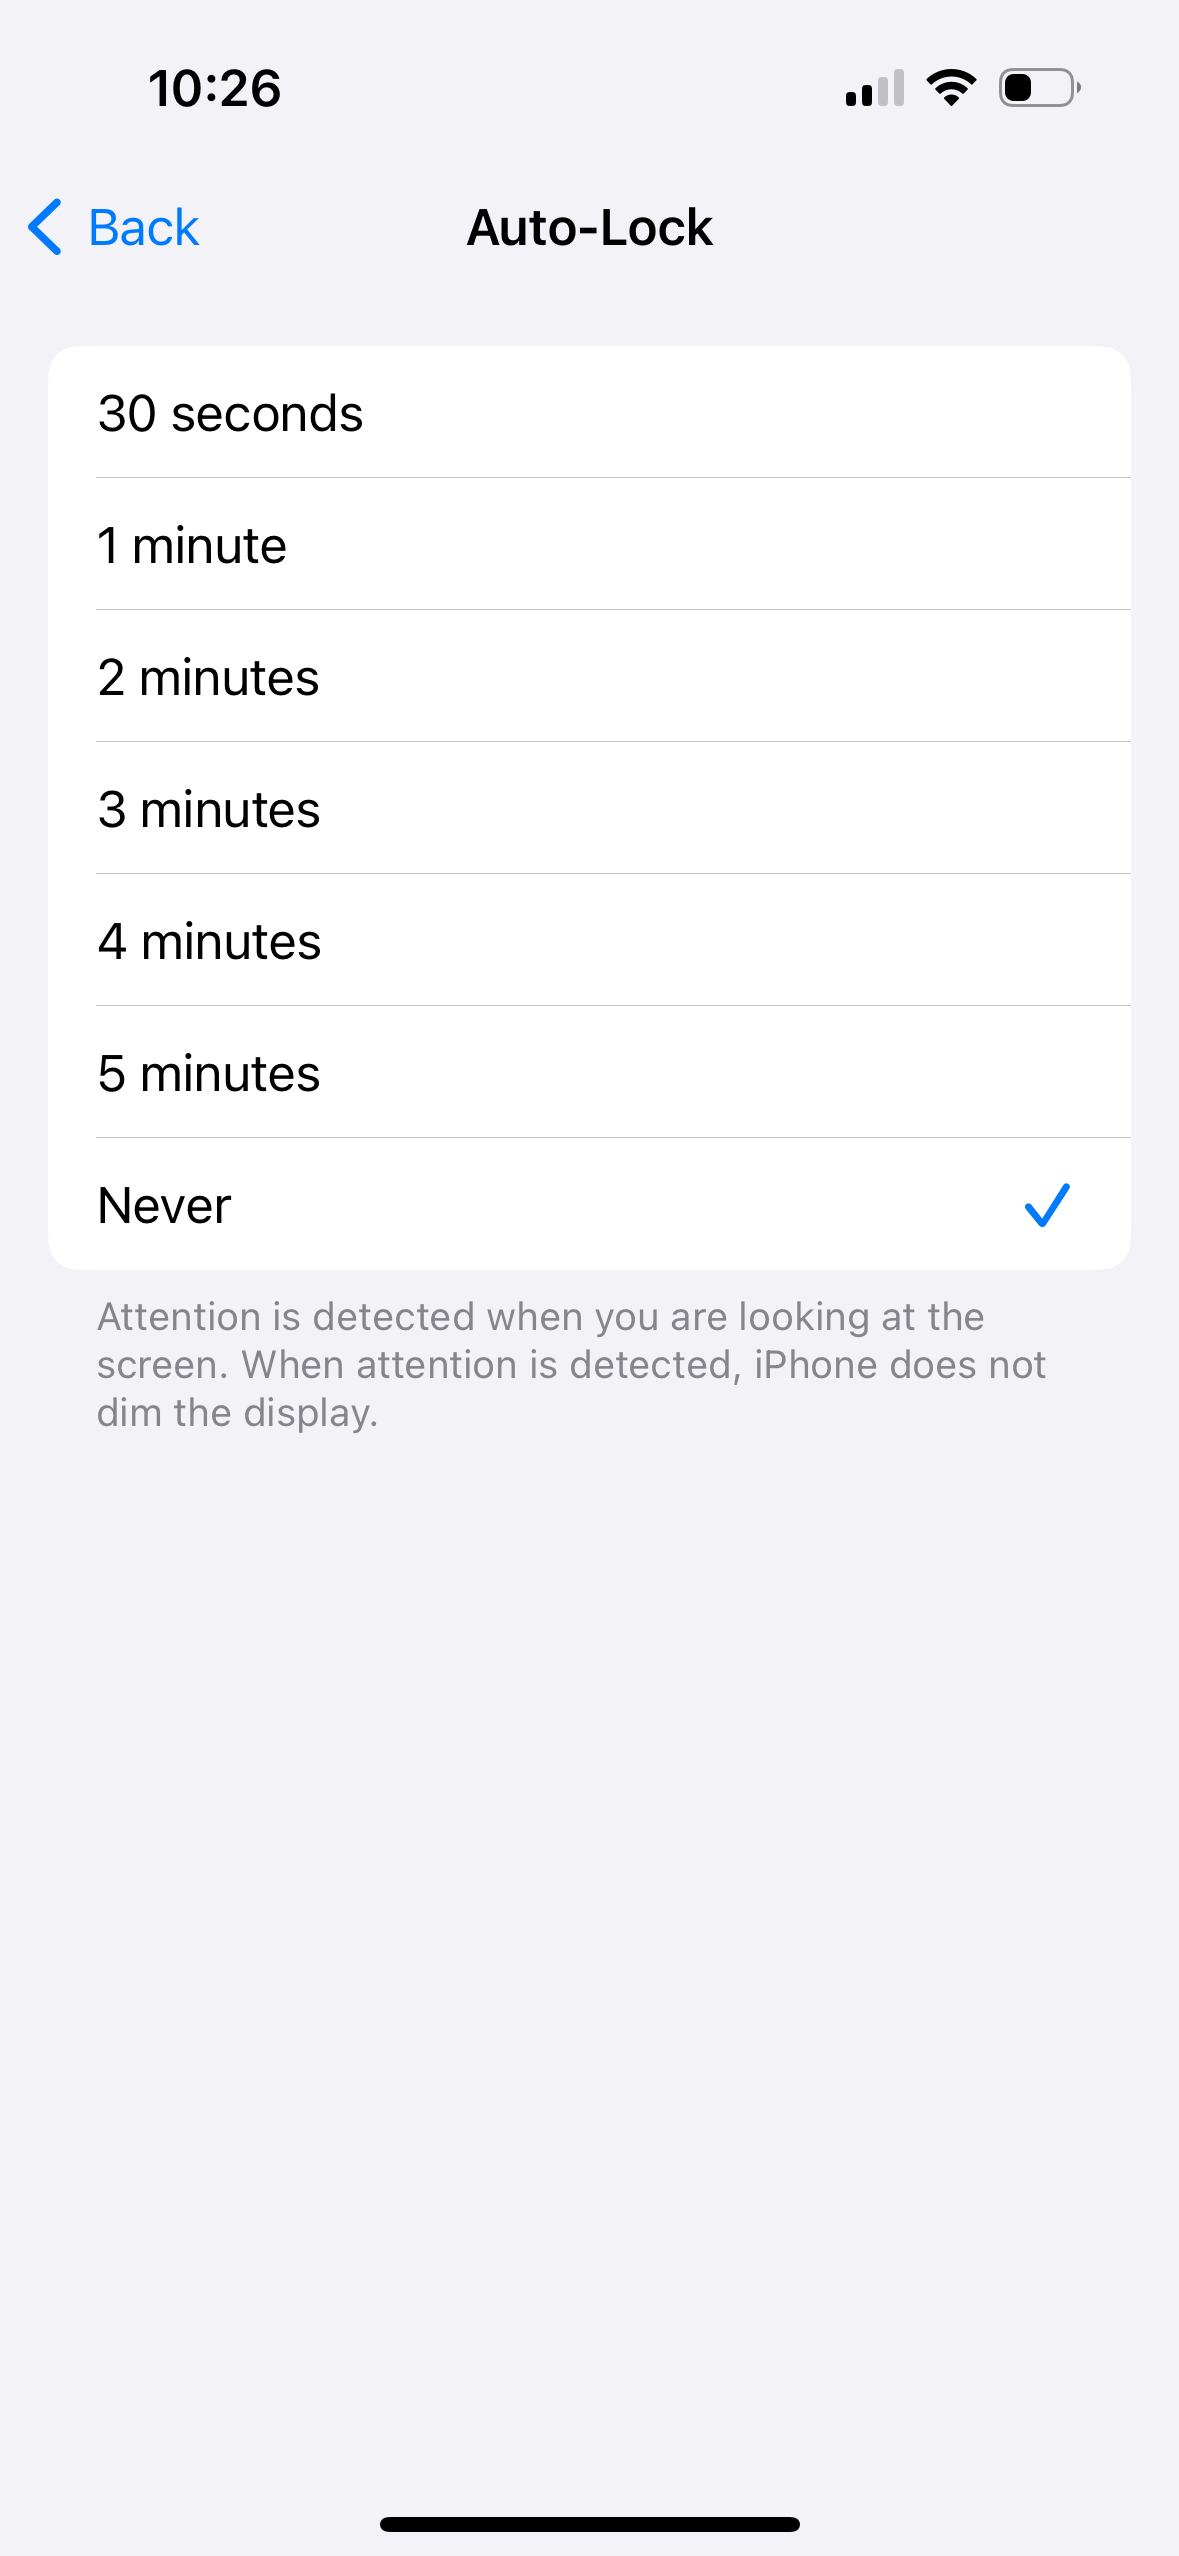 Screenshot of an iPhone Auto-Lock setting screen, with 'Never' selected, preventing the phone from locking automatically. Perfect for online content on how to keep your device on while 'pretending to work.'